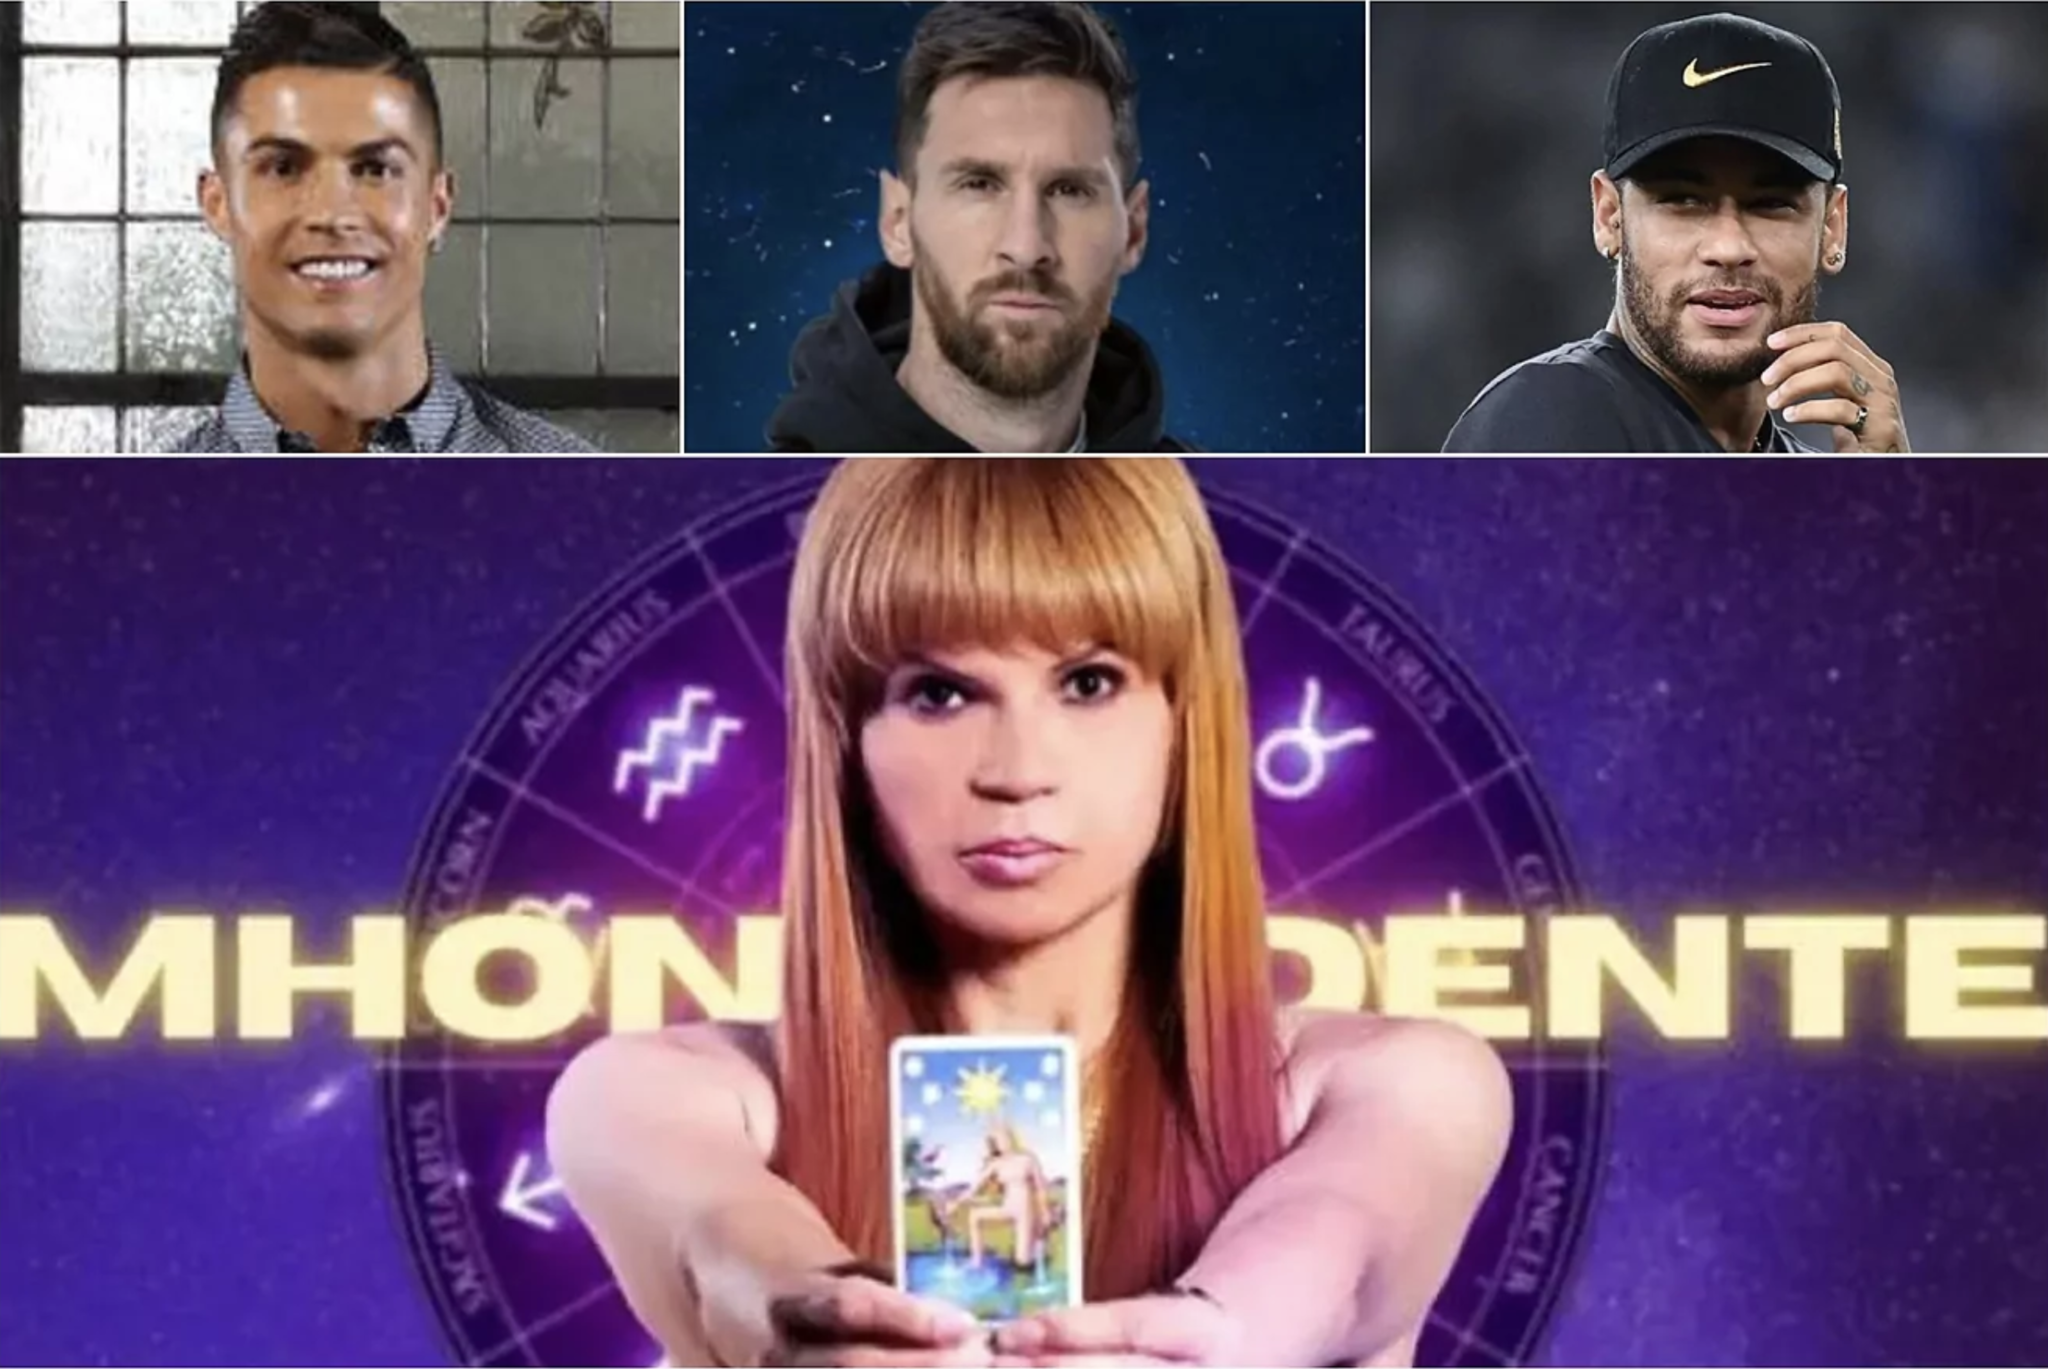 The most controversial predictions of a psychic about Leo Messi, Cristiano Ronaldo and Neymar: Divorces, transsexuals, pregnancies, bisexuals...